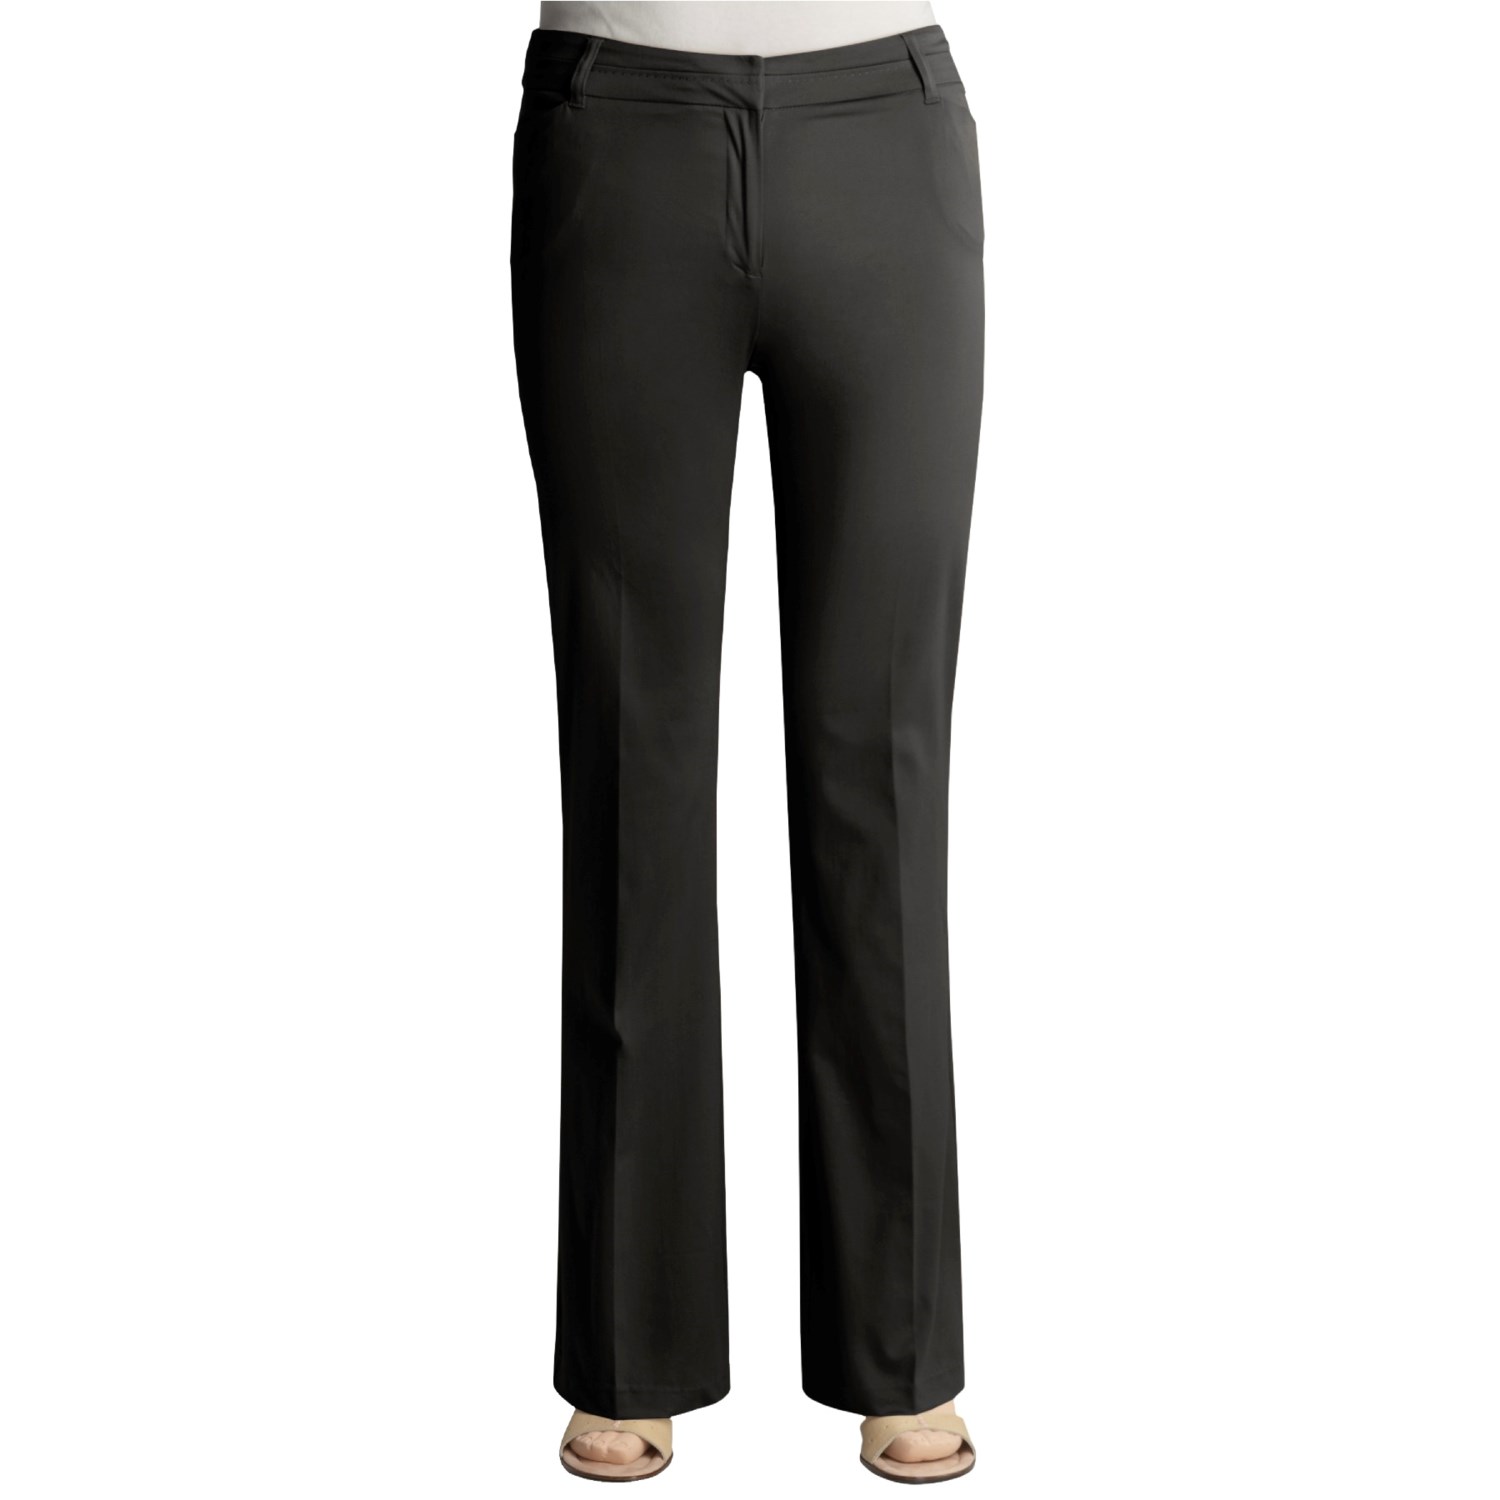 Tall Girl Stretch Cotton Pants (For Tall Women) 2432T - Save 62%